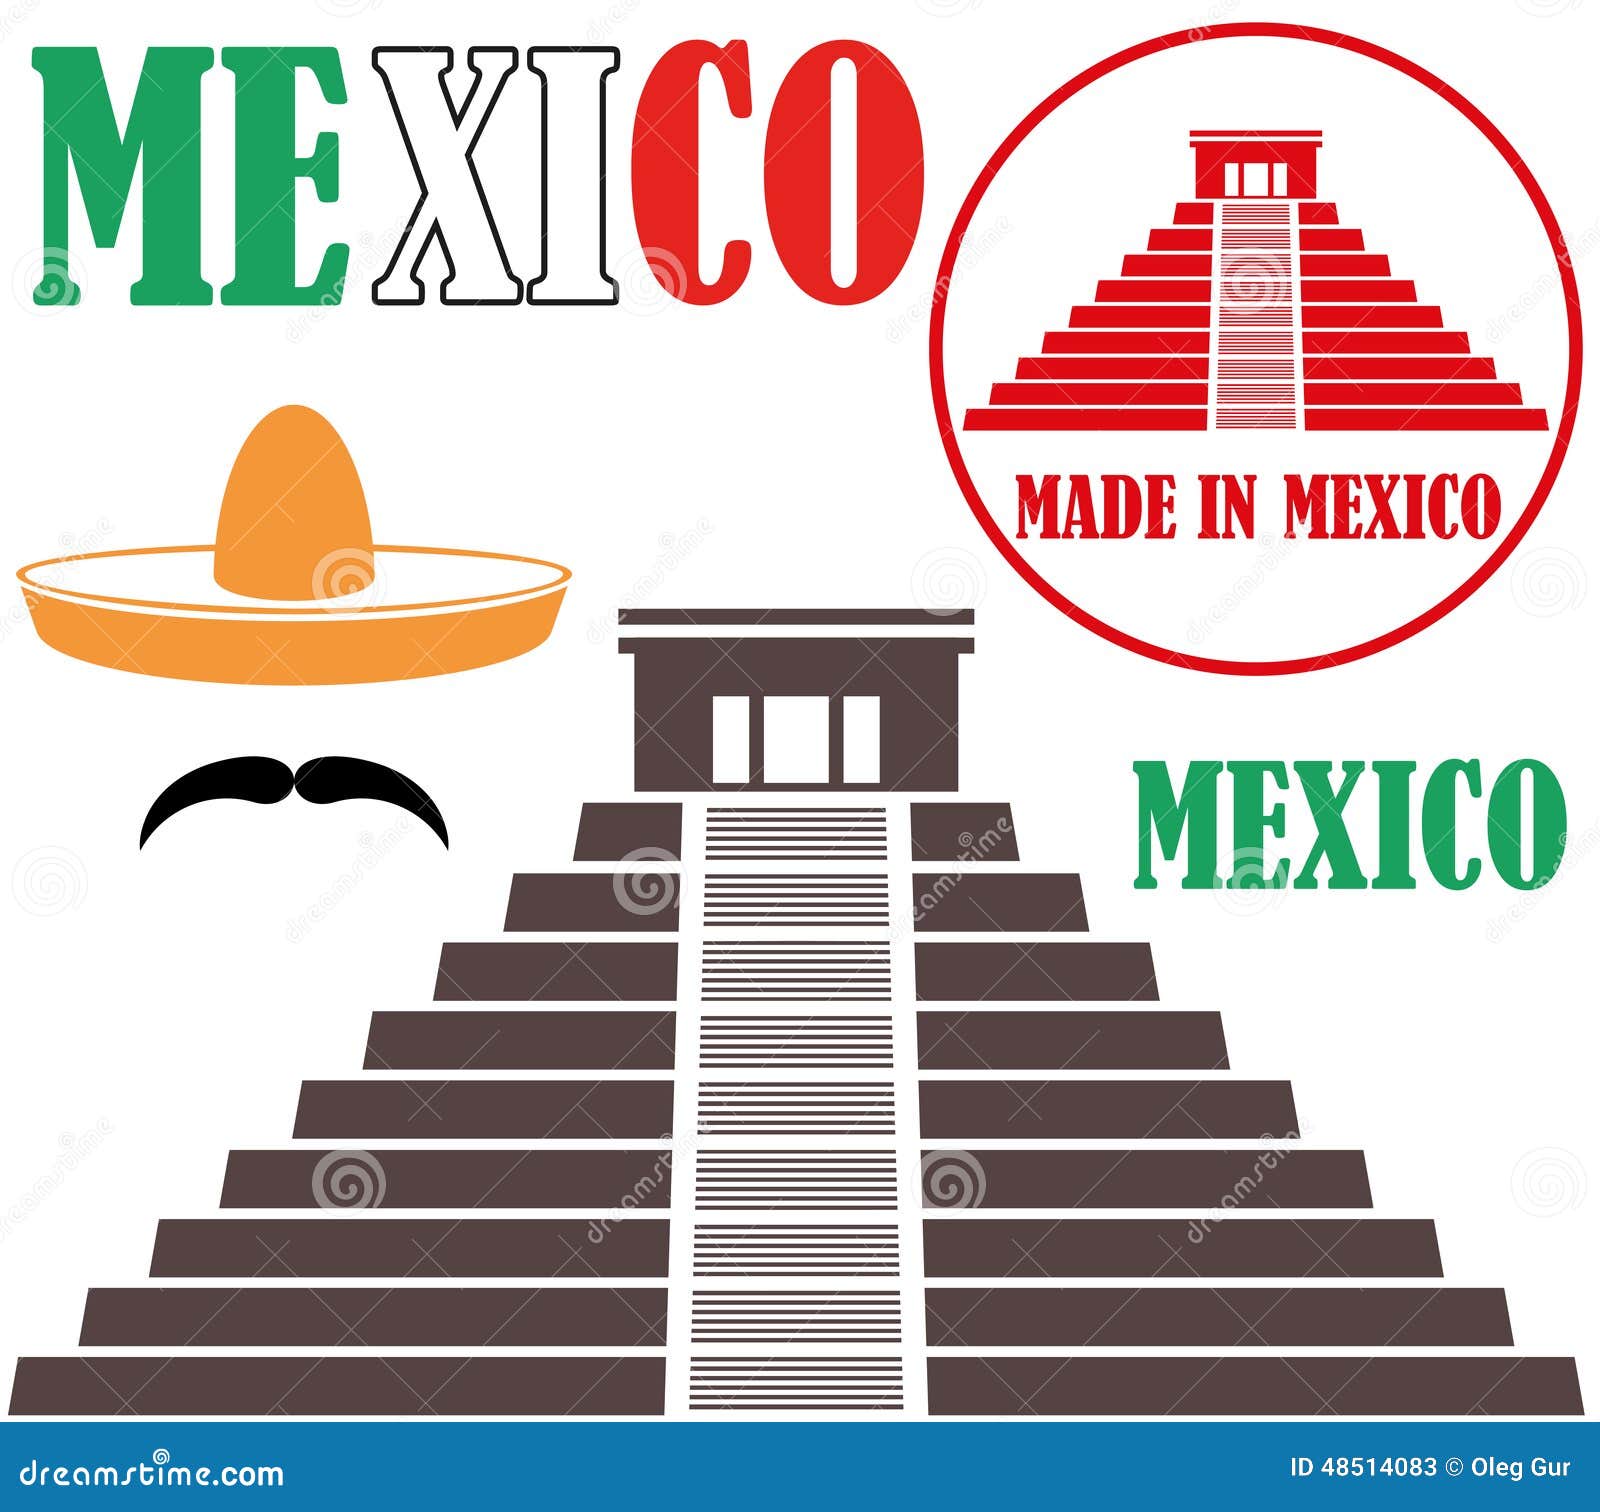 Mexico stock vector. Illustration of abstract, banner - 48514083